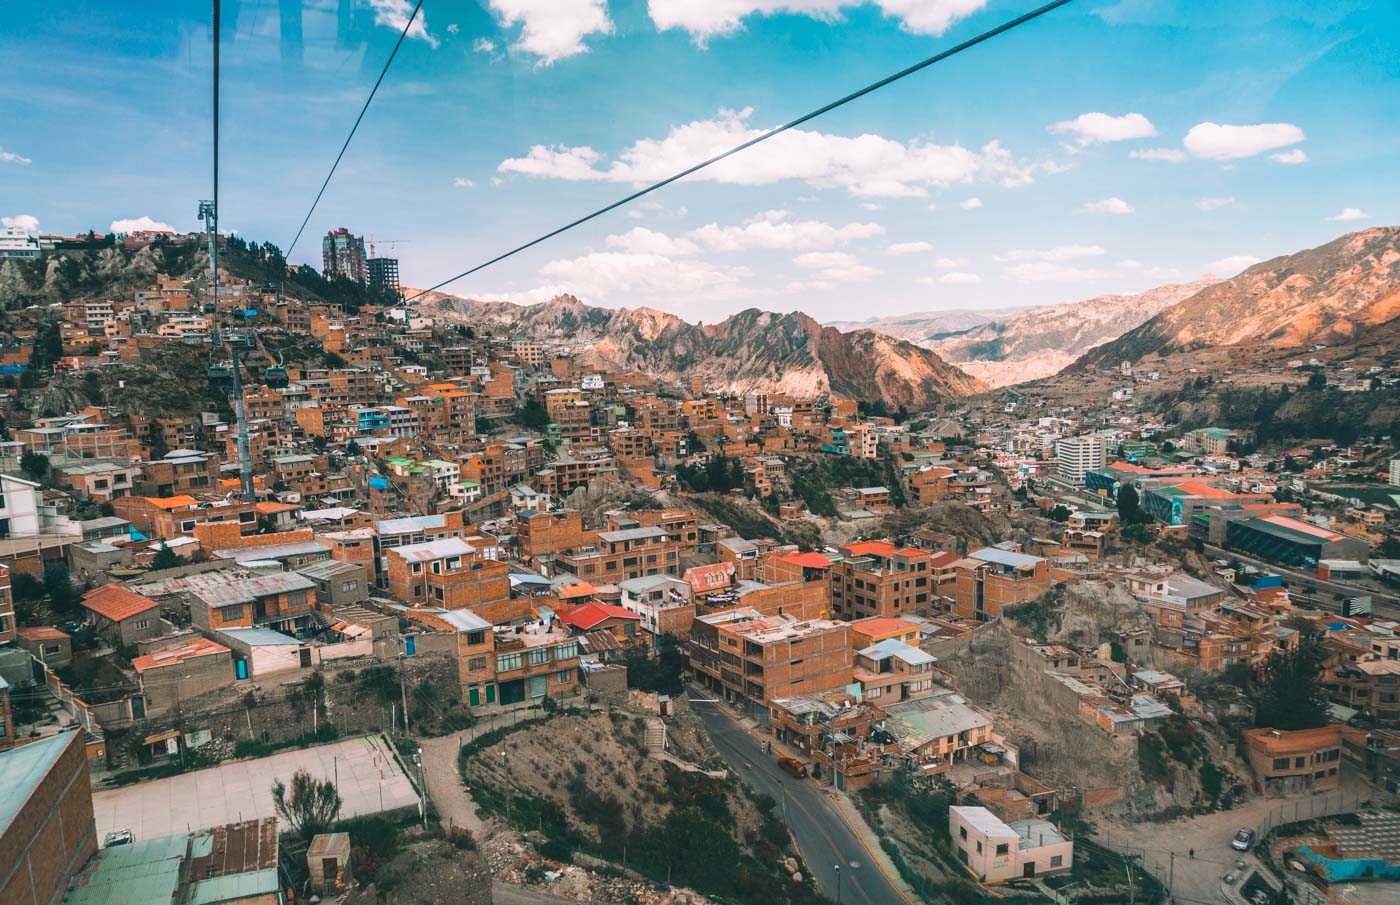 View of La Paz from the Cable car